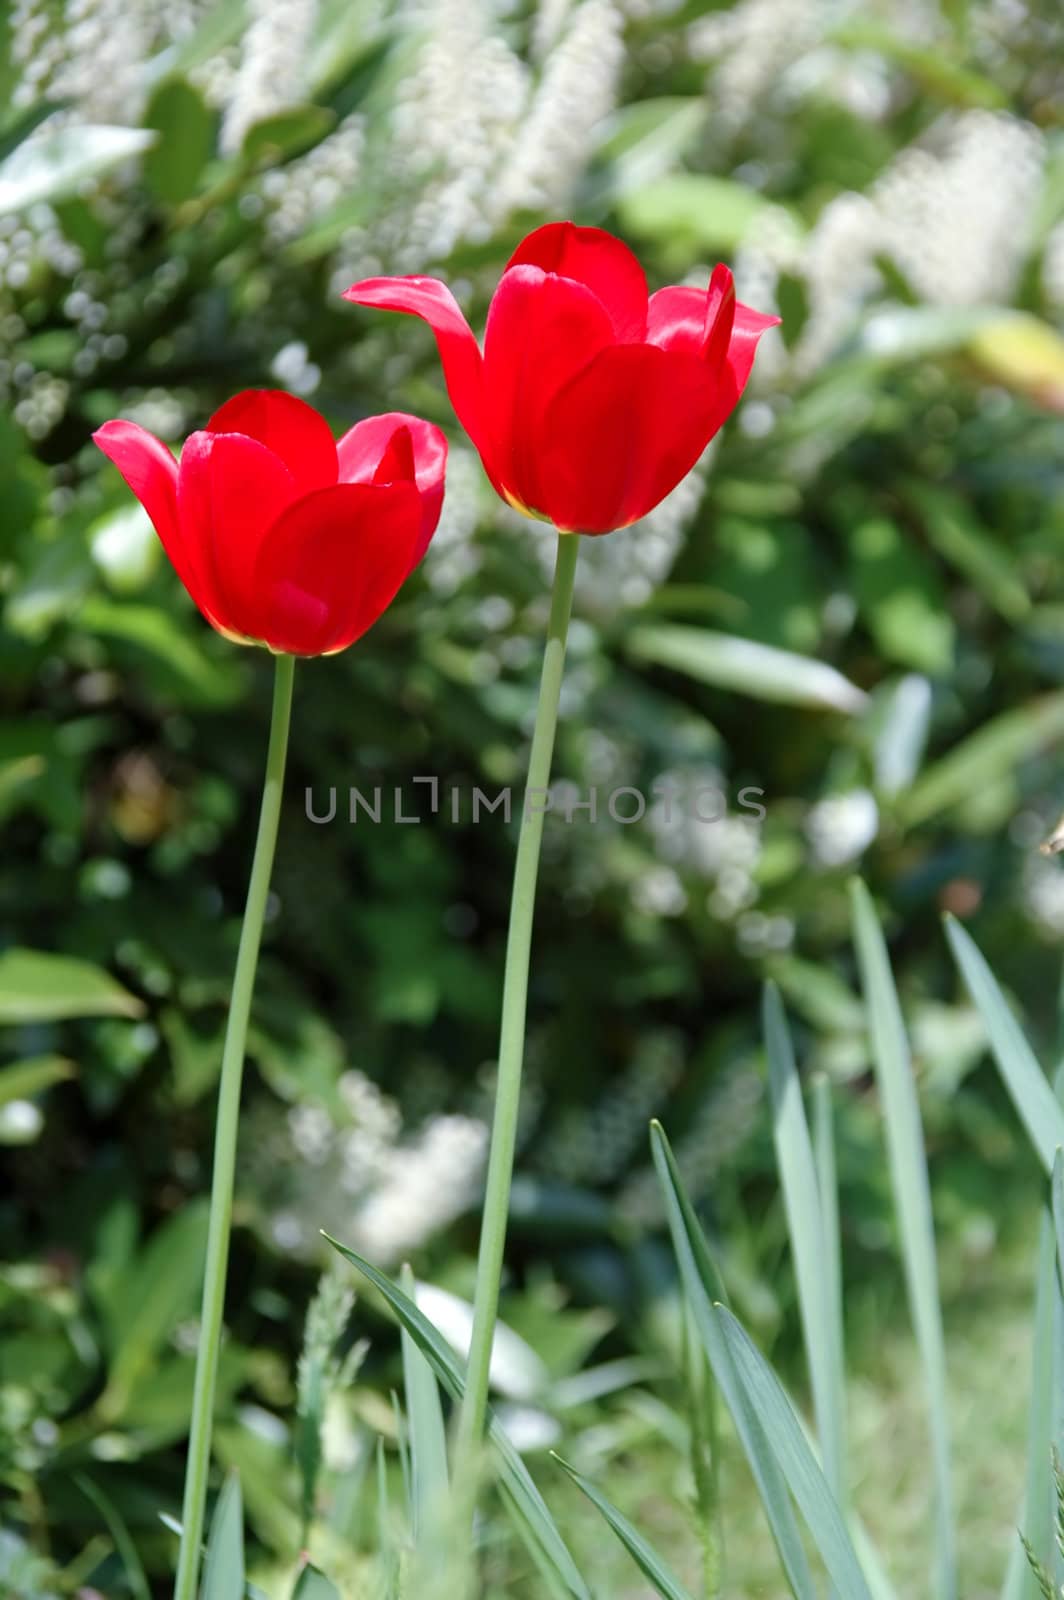 Two tulips are in focus. The other plants in the background are in blur.